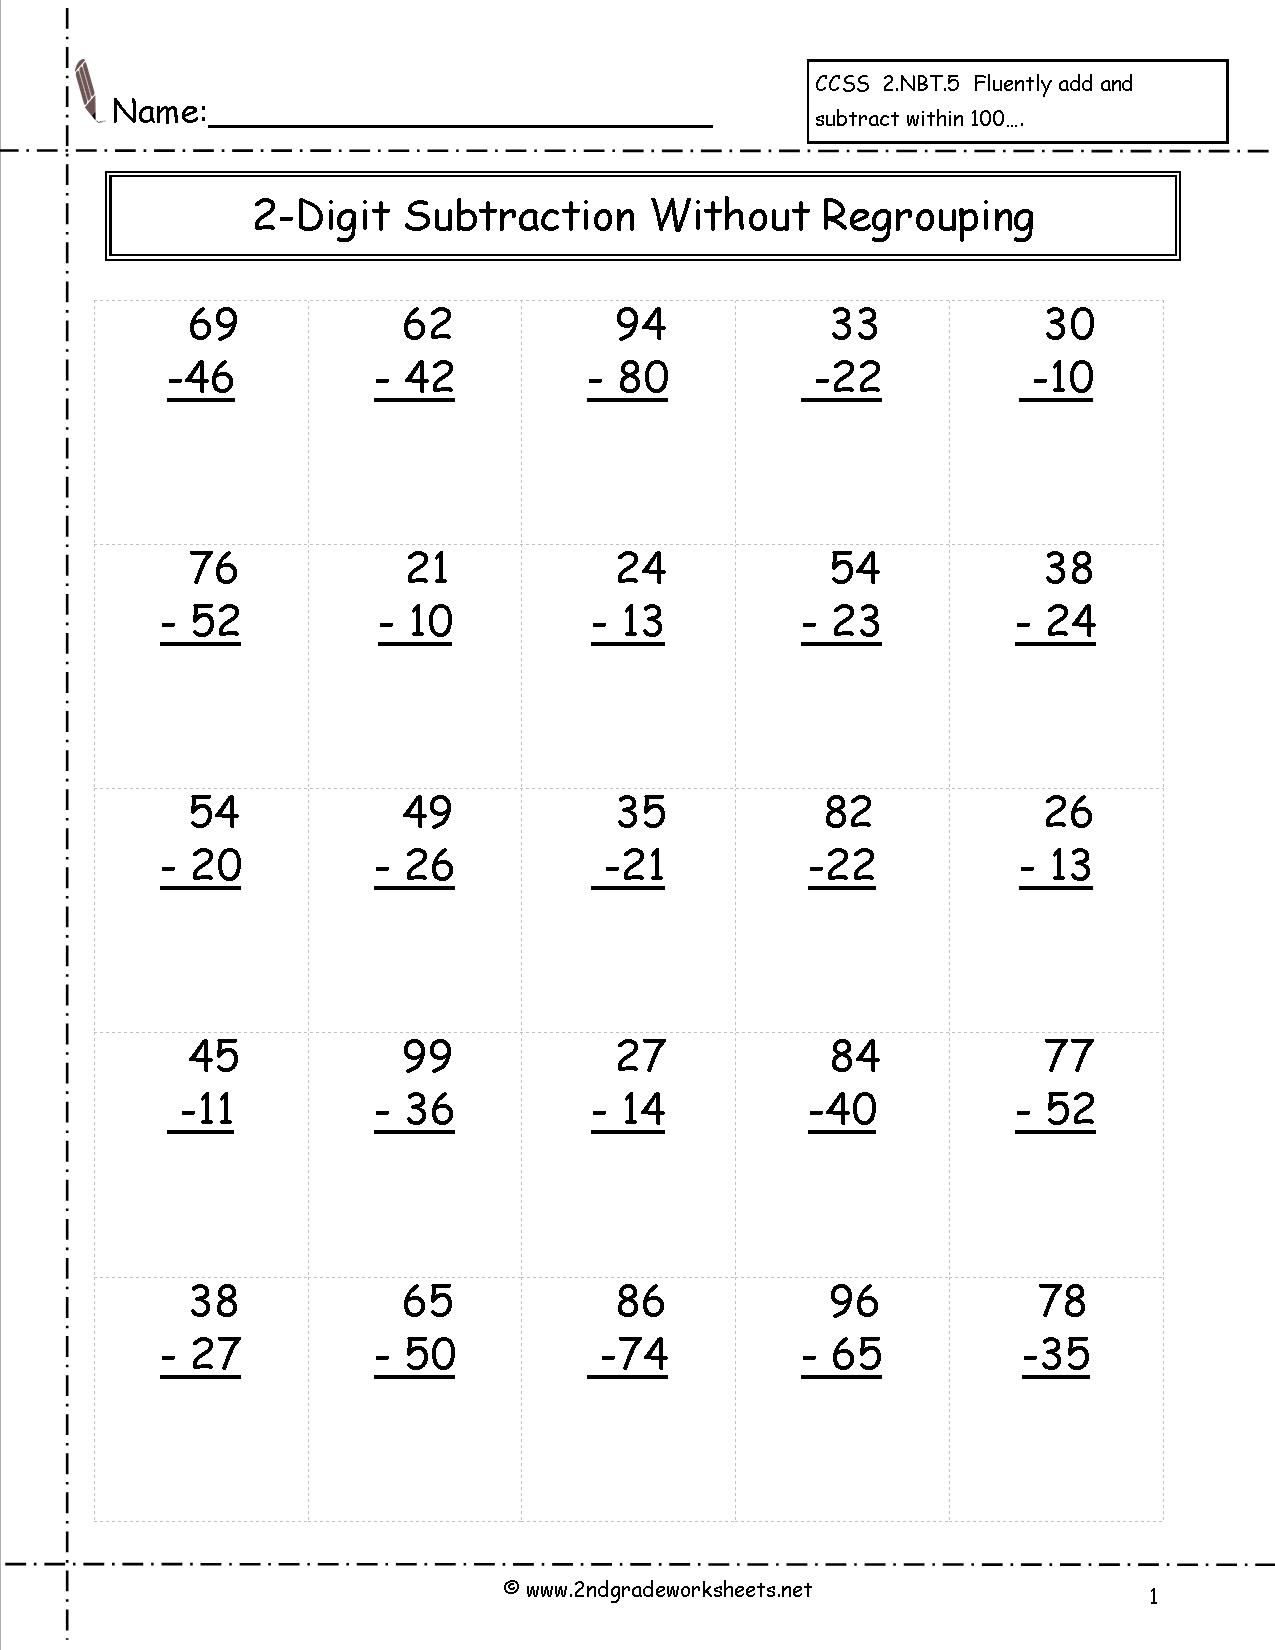 Addition And Subtraction Worksheets For Grade 2